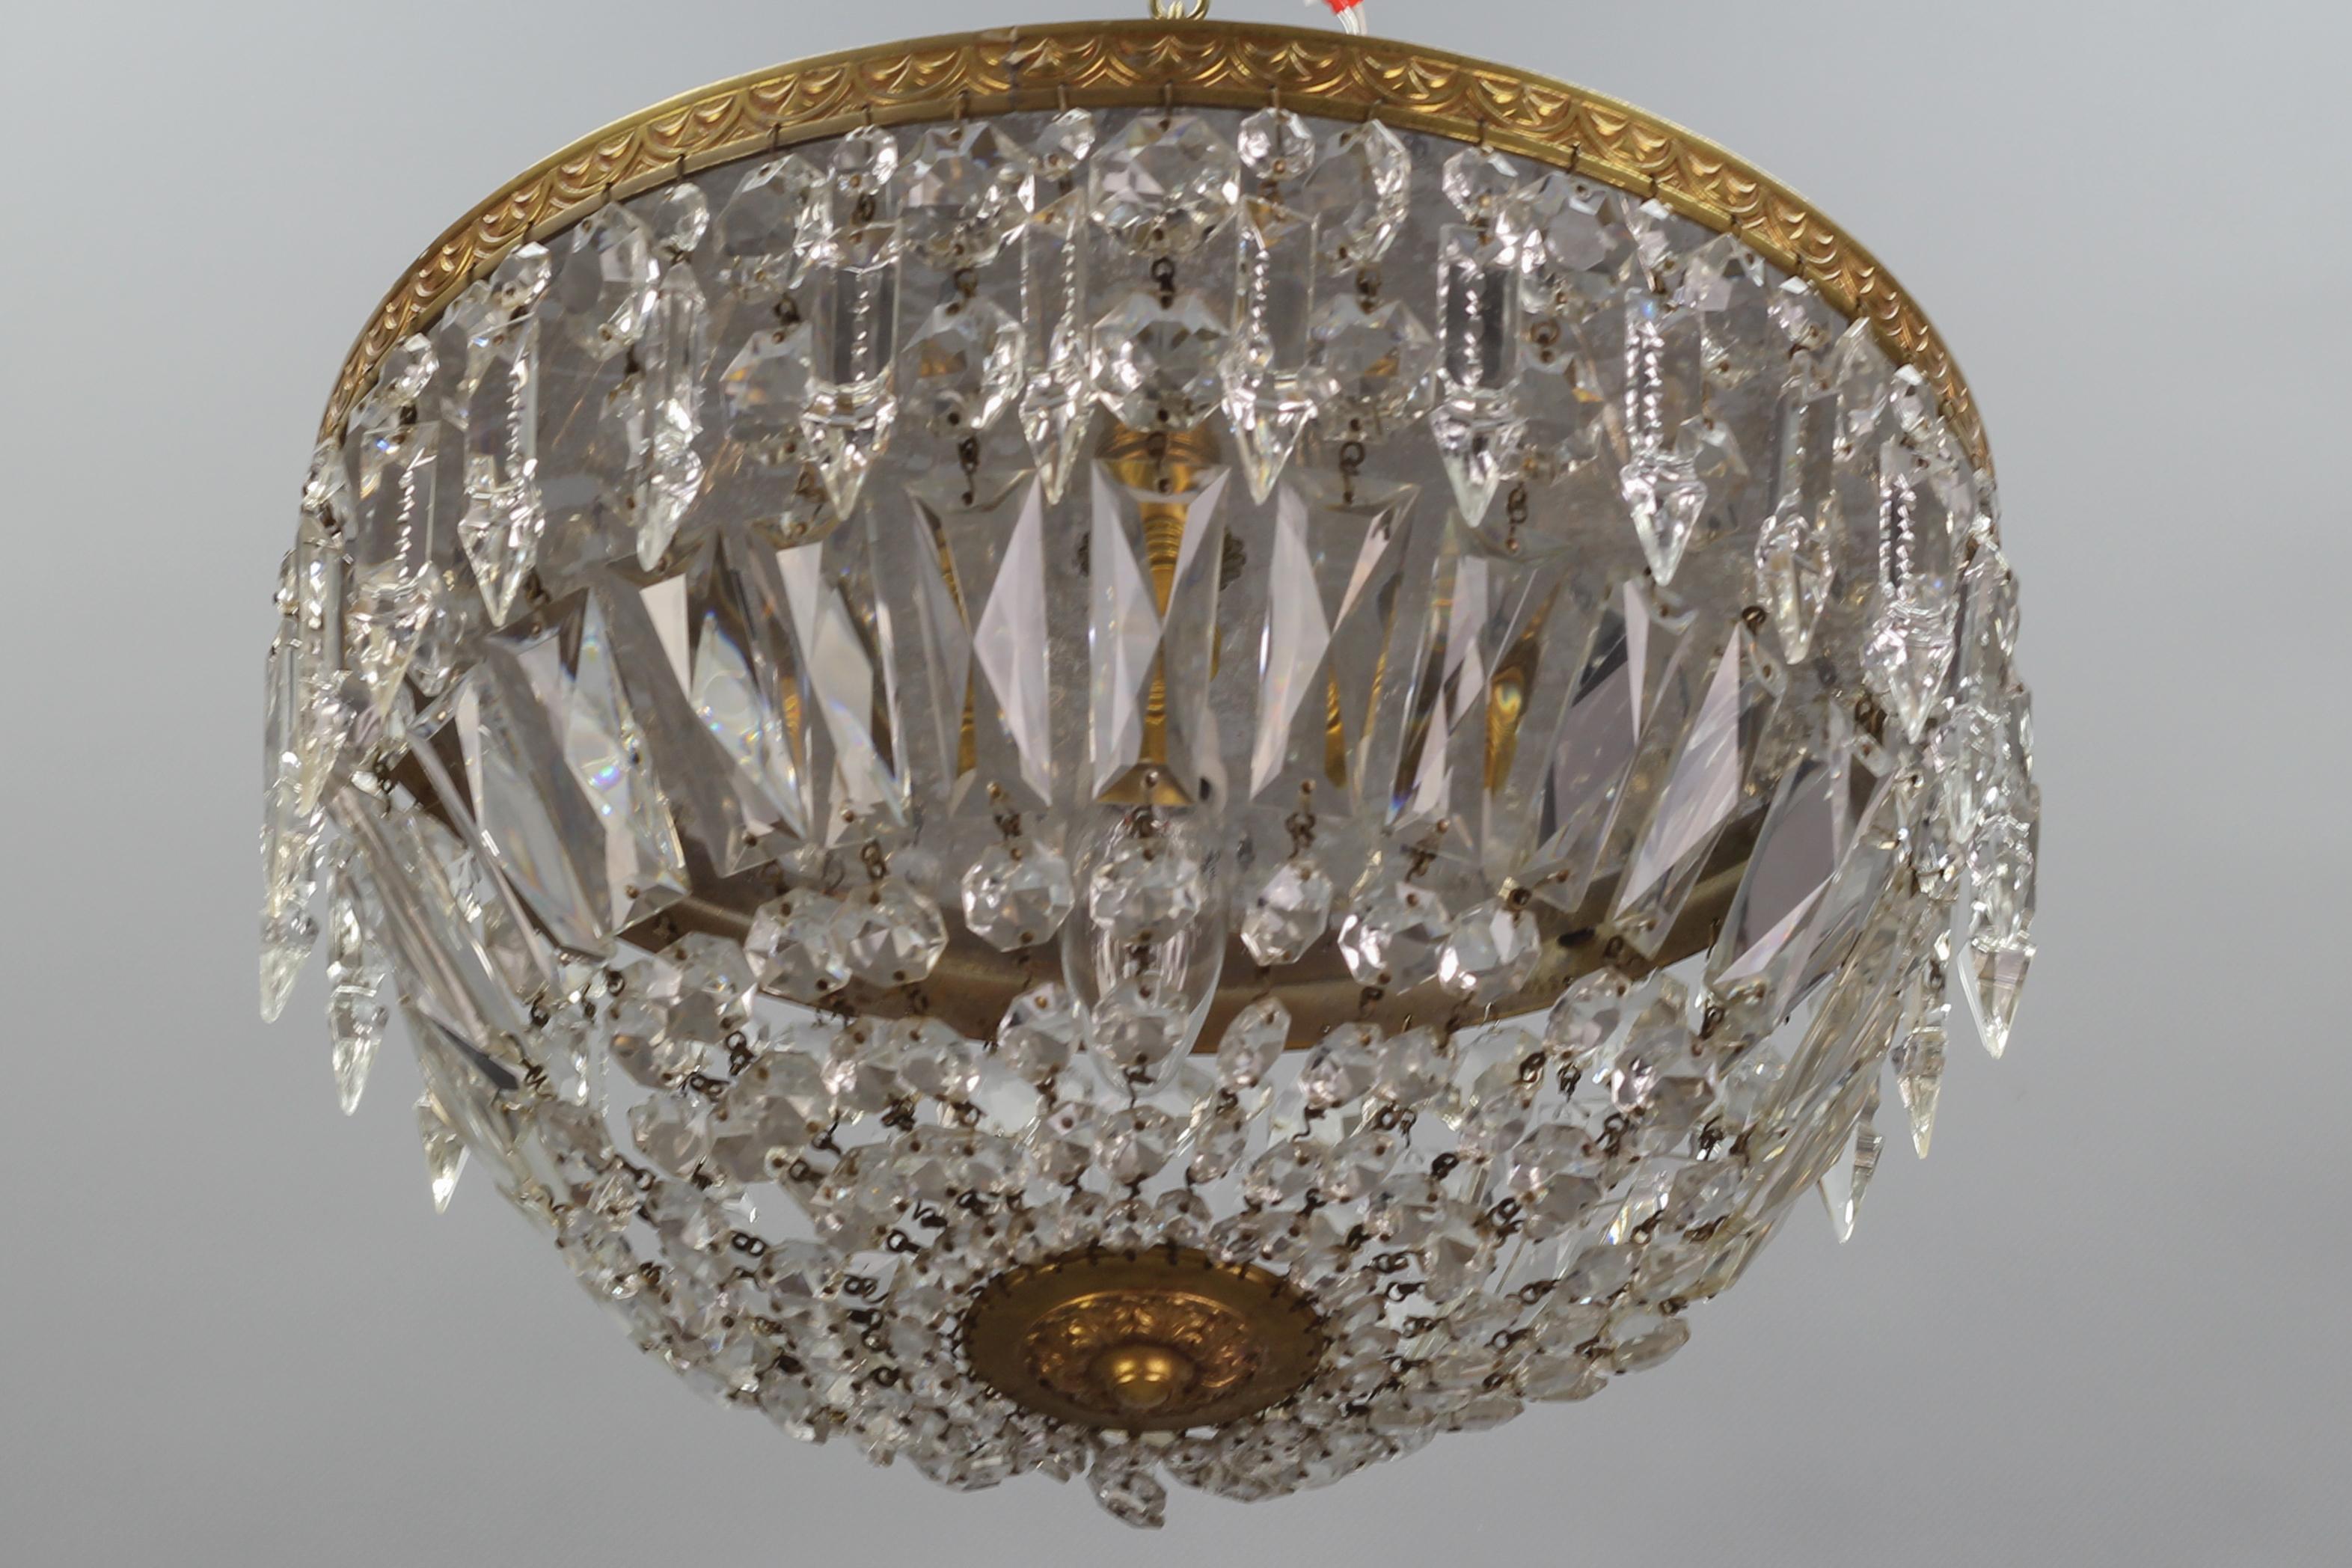 French Art Deco Style Crystal Glass and Brass Basket Ceiling Light Fixture 5